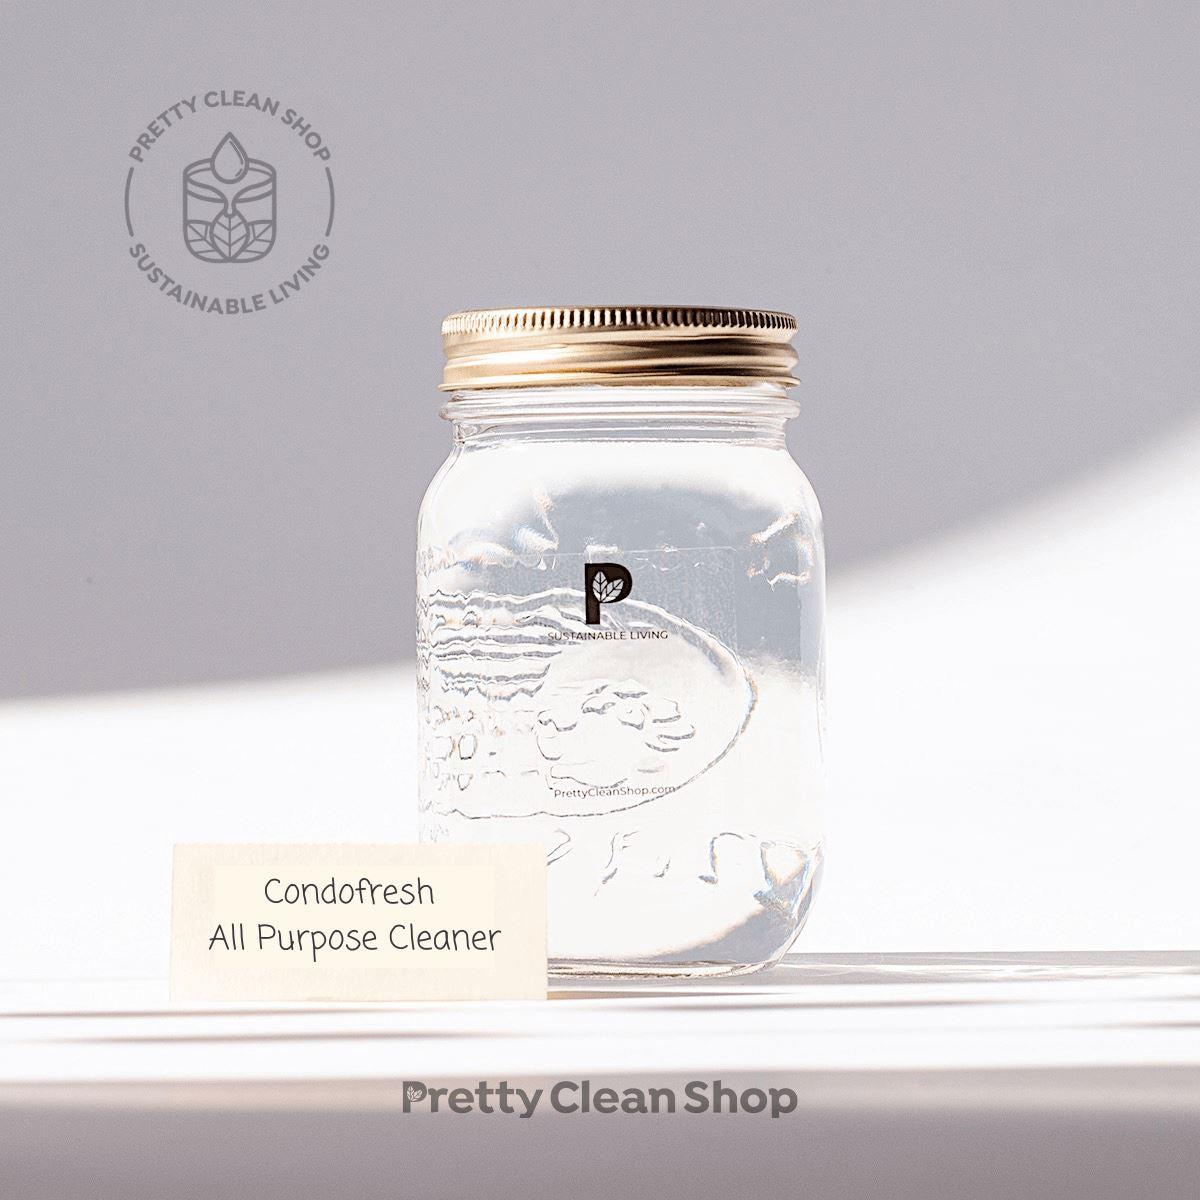 All Purpose Cleaner - Lavender Mint Home Condo Fresh 1L glass jar (REFILLABLE, includes $1.25 deposit) Prettycleanshop